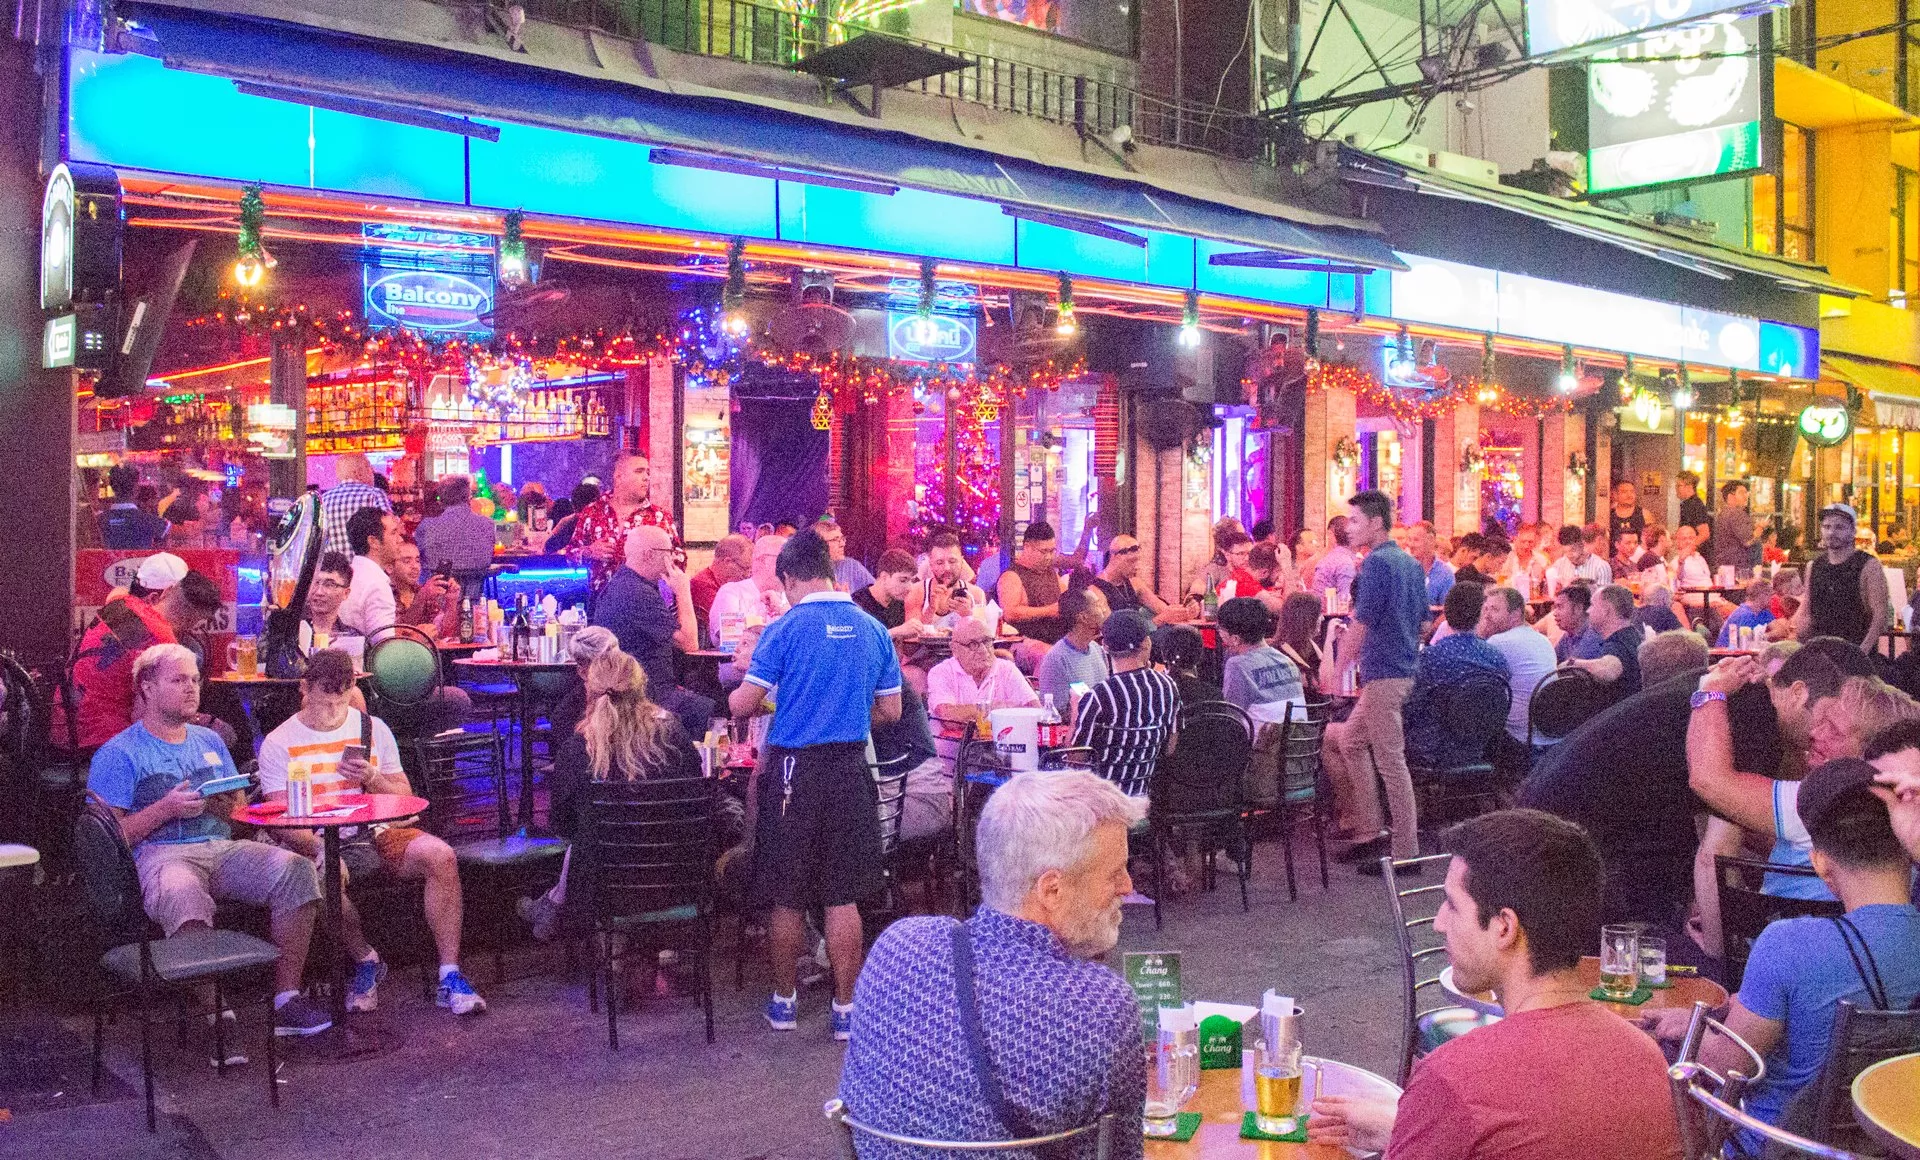 The Balcony in Thailand, Central Asia | LGBT-Friendly Places,Bars - Rated 0.8